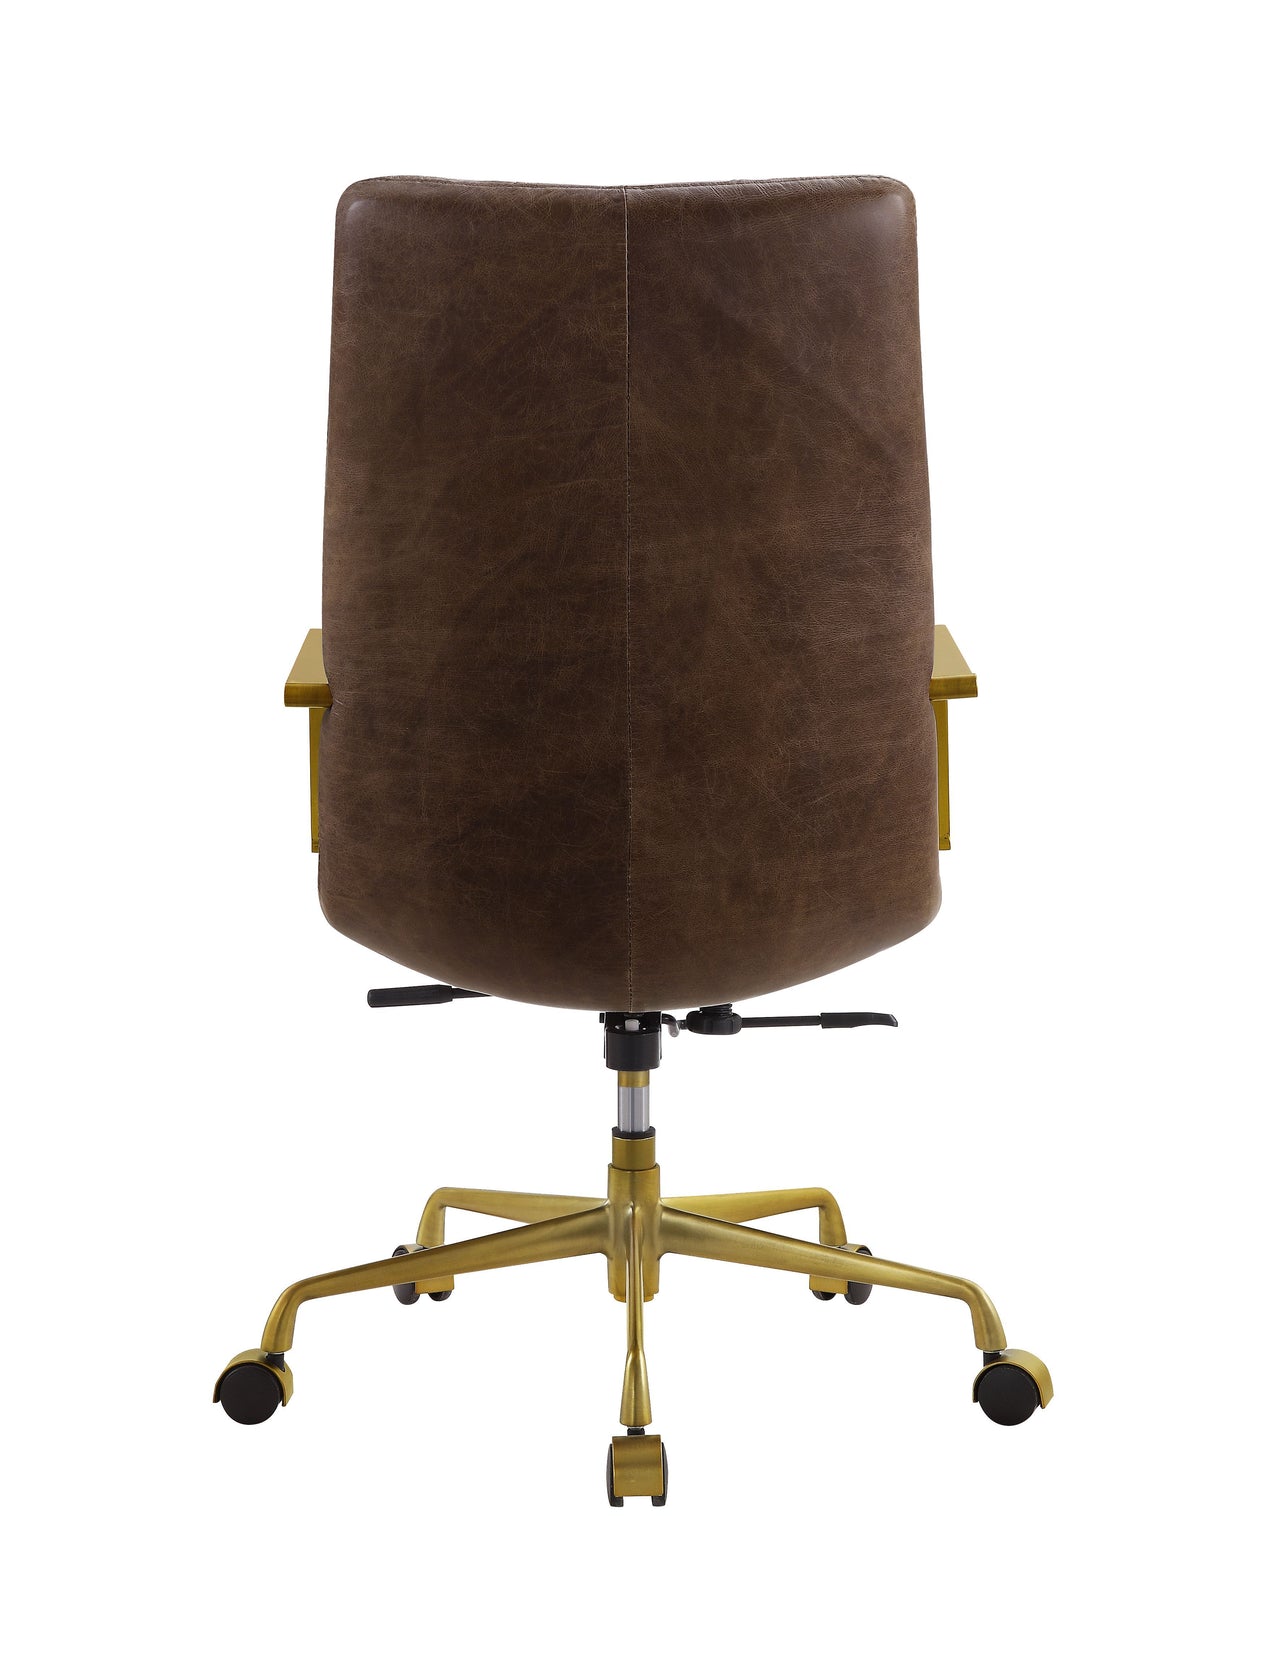 Rolento - Executive Office Chair - Espresso Top Grain Leather - Tony's Home Furnishings